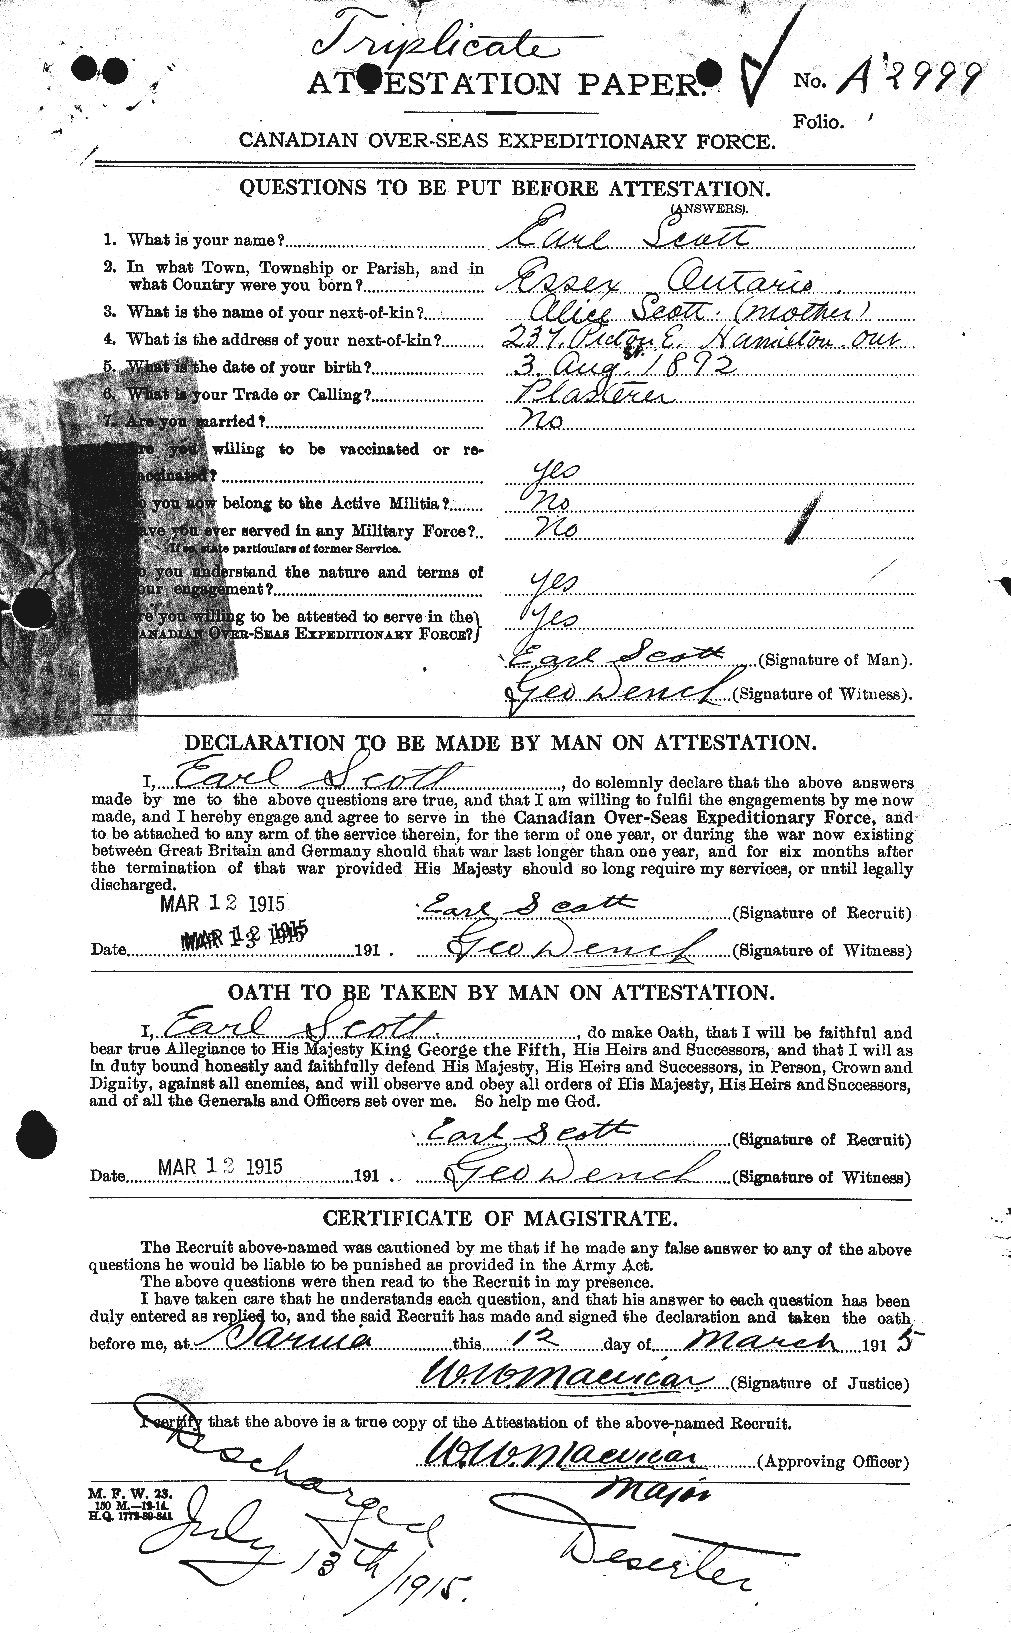 Personnel Records of the First World War - CEF 085339b